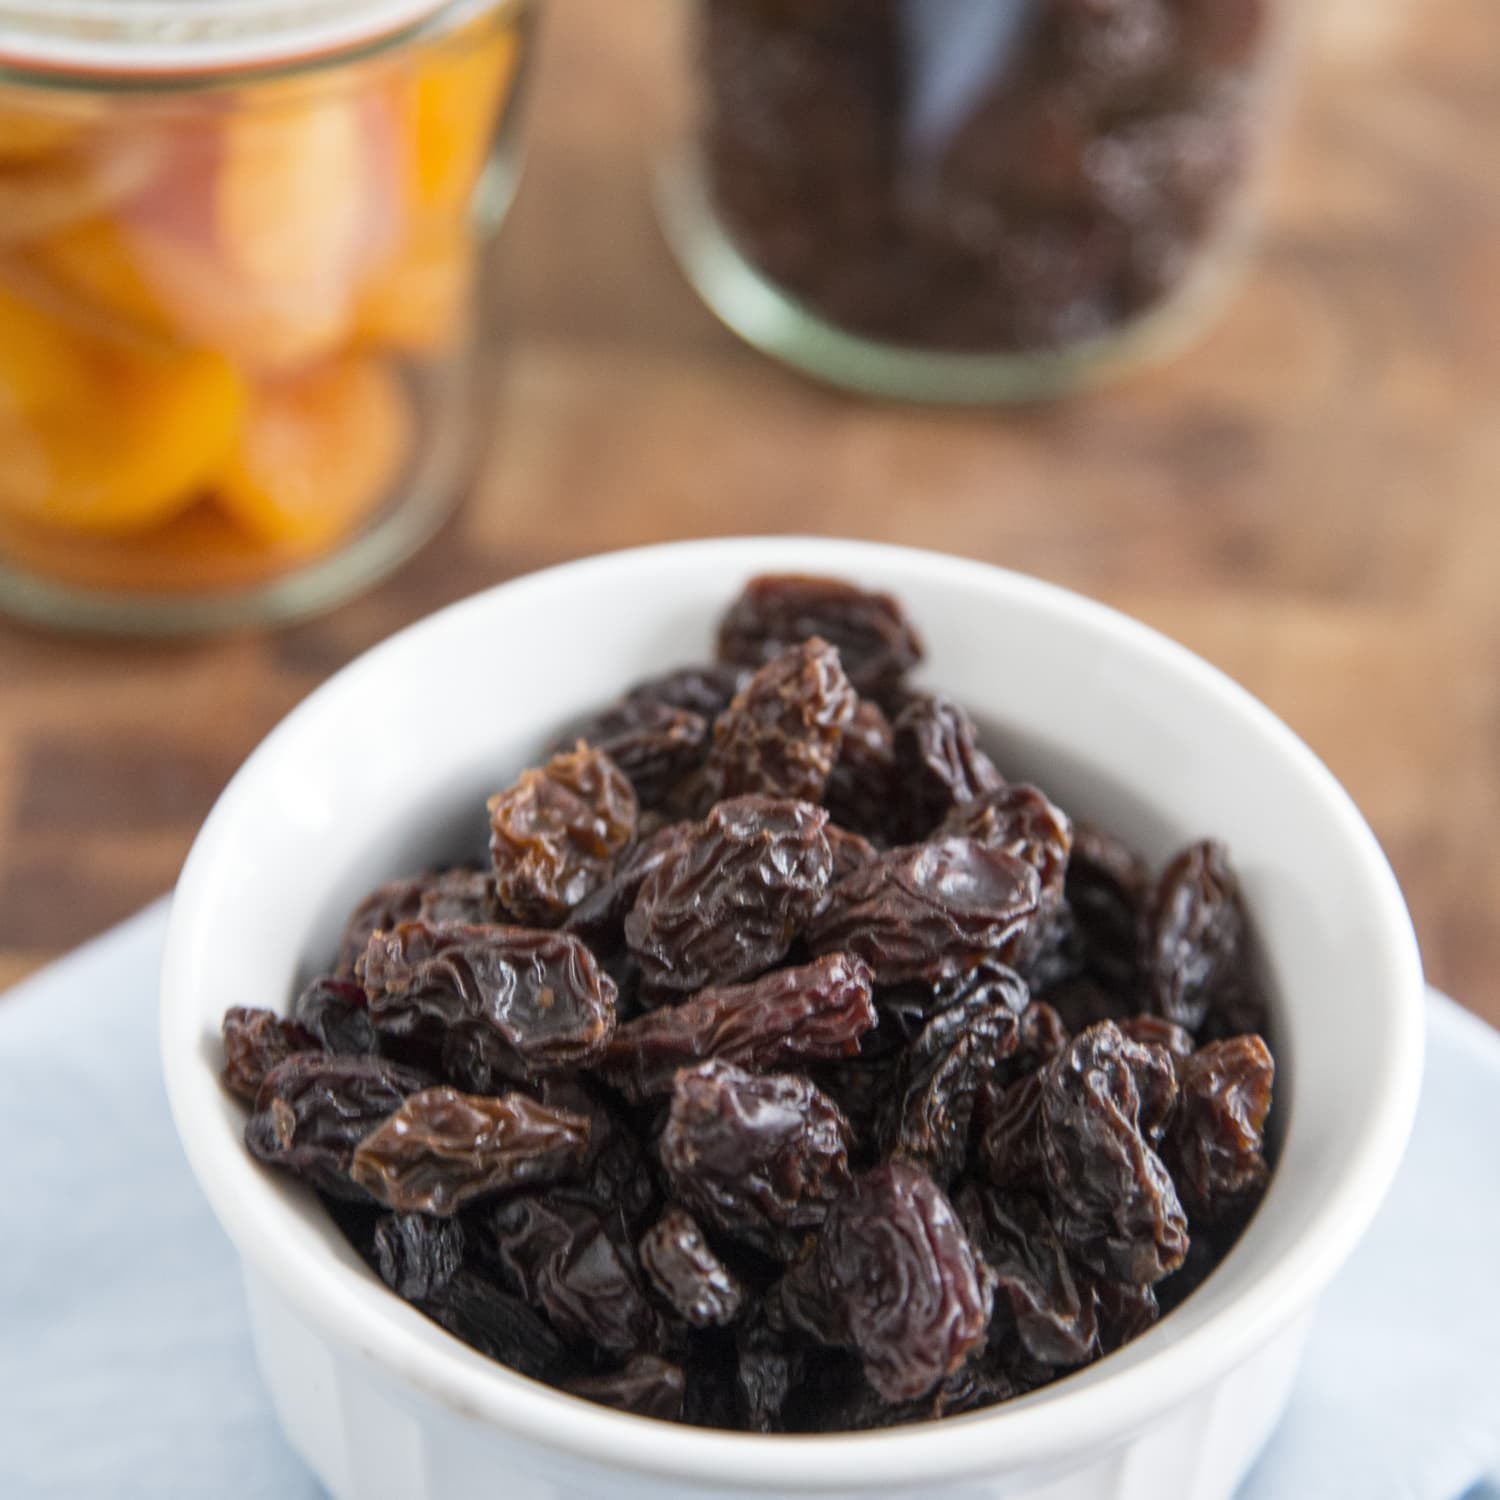 The Best Way to Soften Dried Fruit